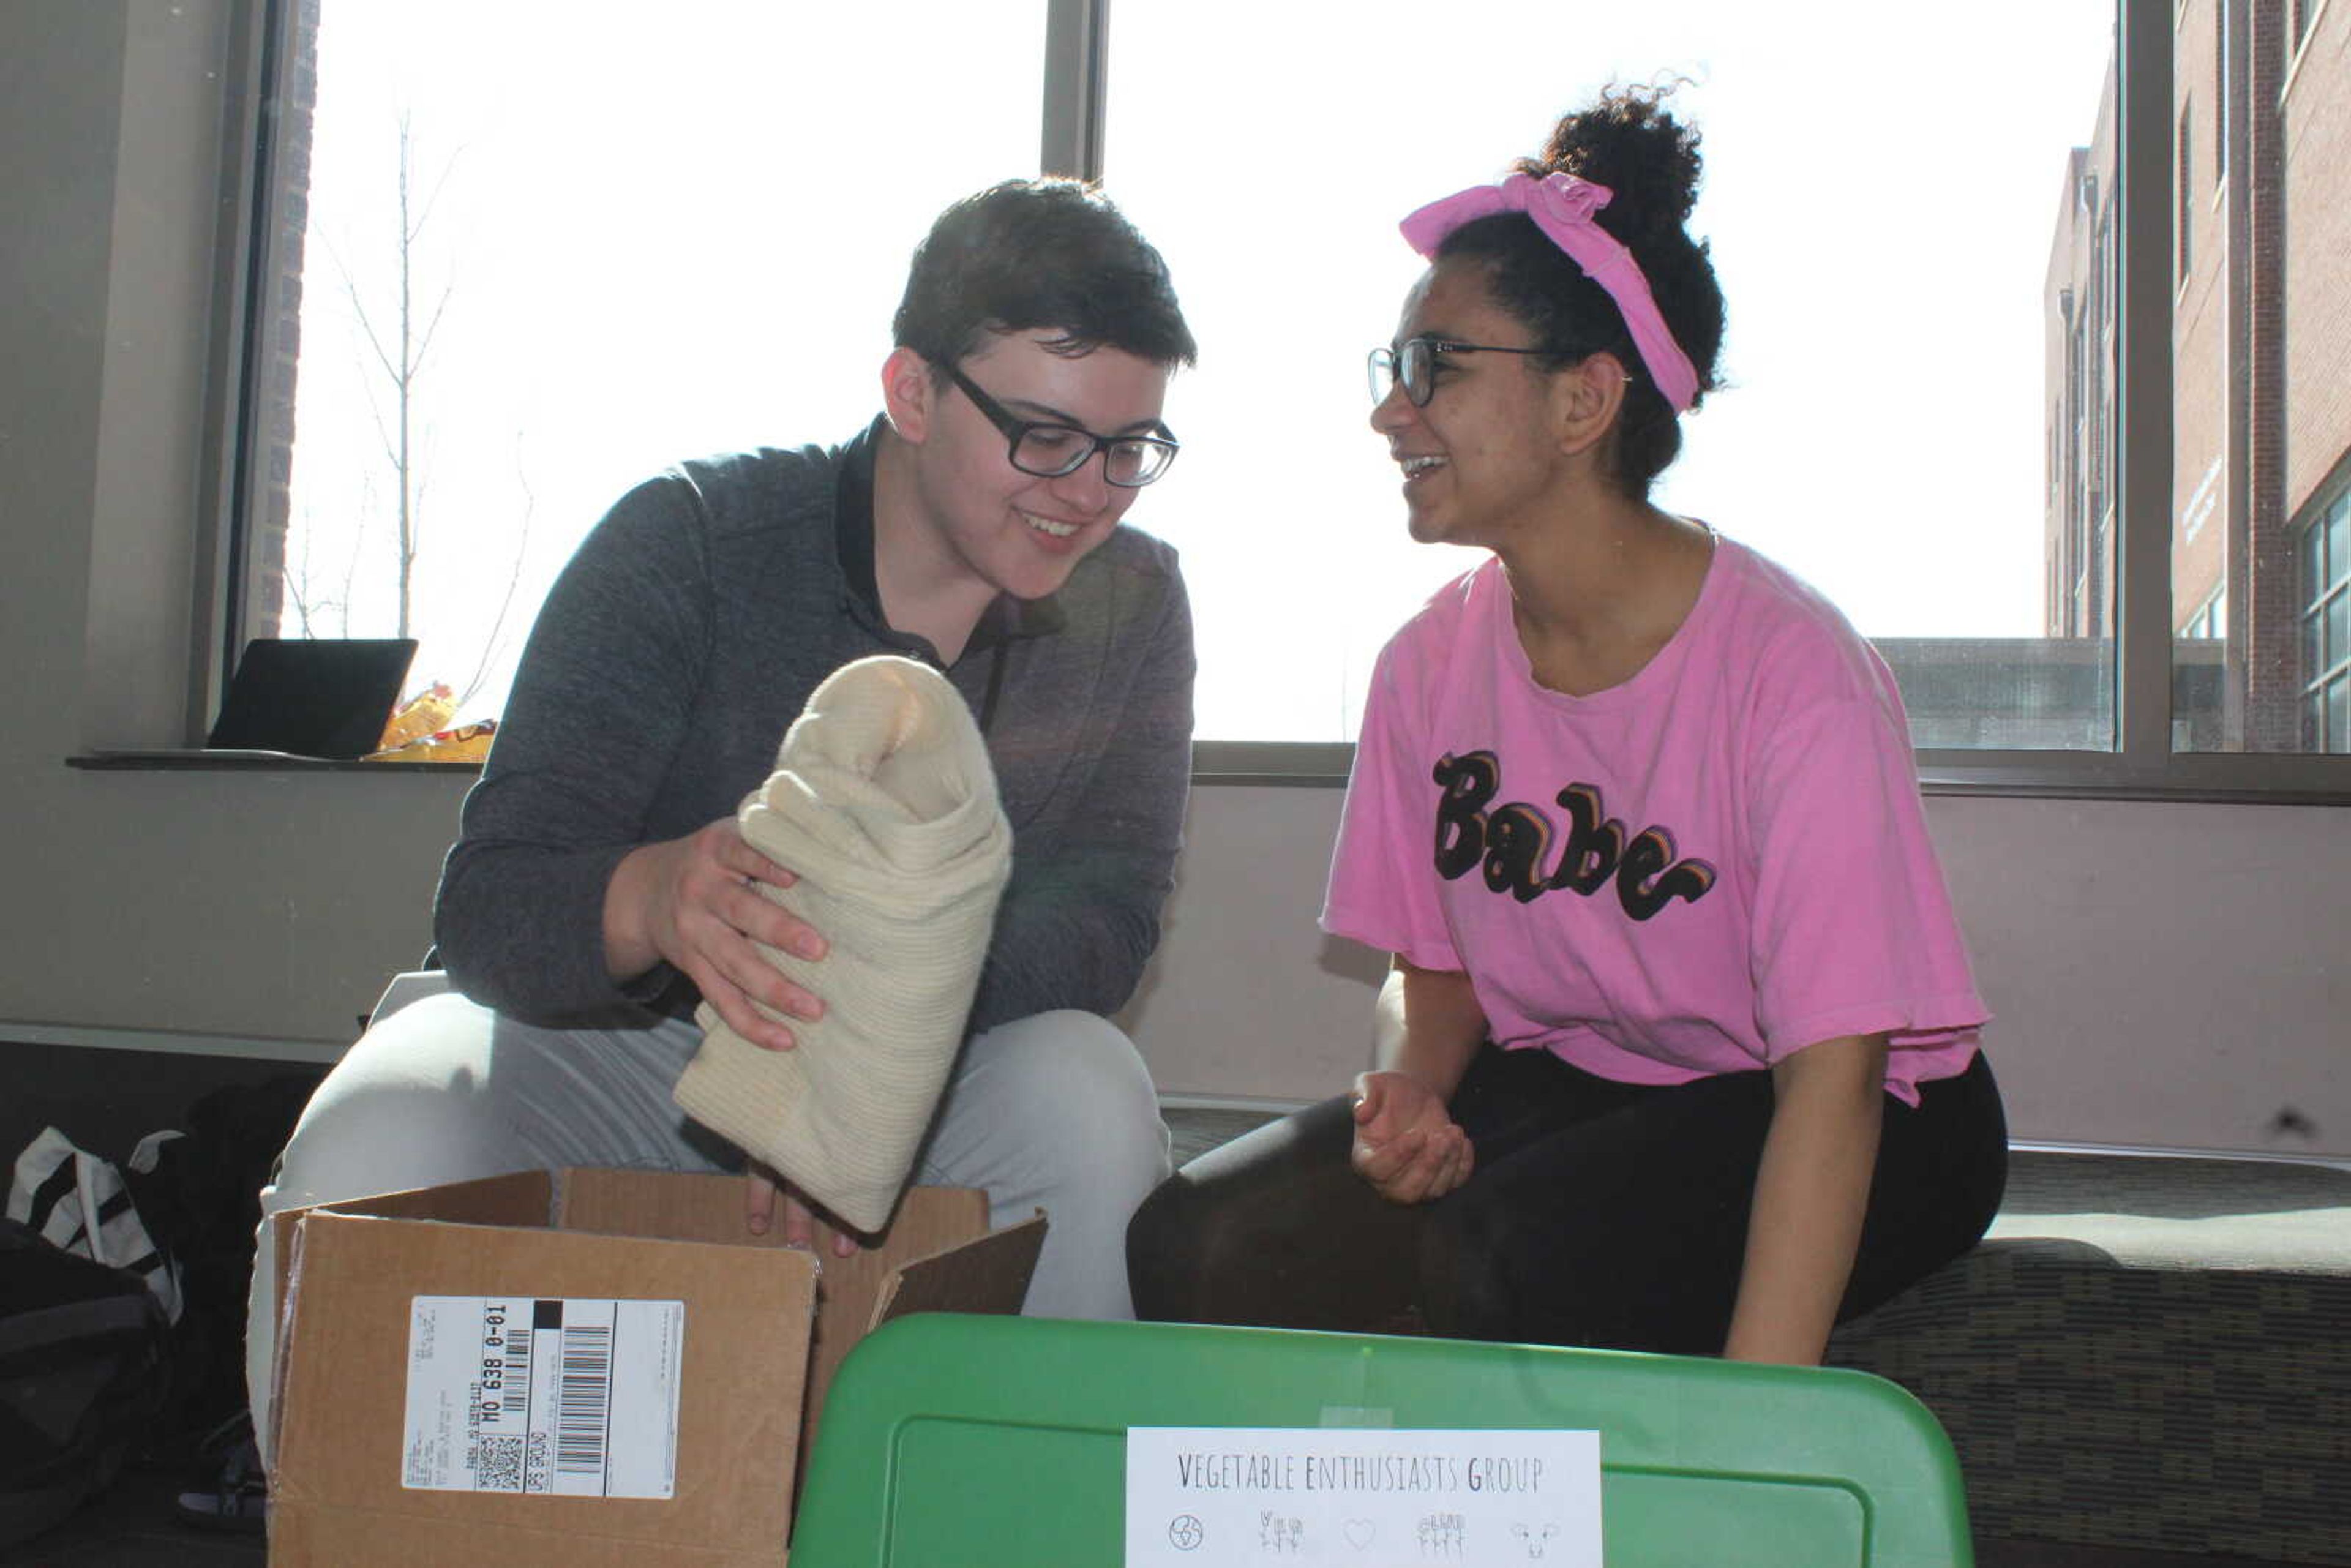 Freshman Mahala Pruett-Pittman, president of the V.E.G. club and Freshman Jacob Welch, another member, fold clothes received from clothing donations for clothing swap March 29.